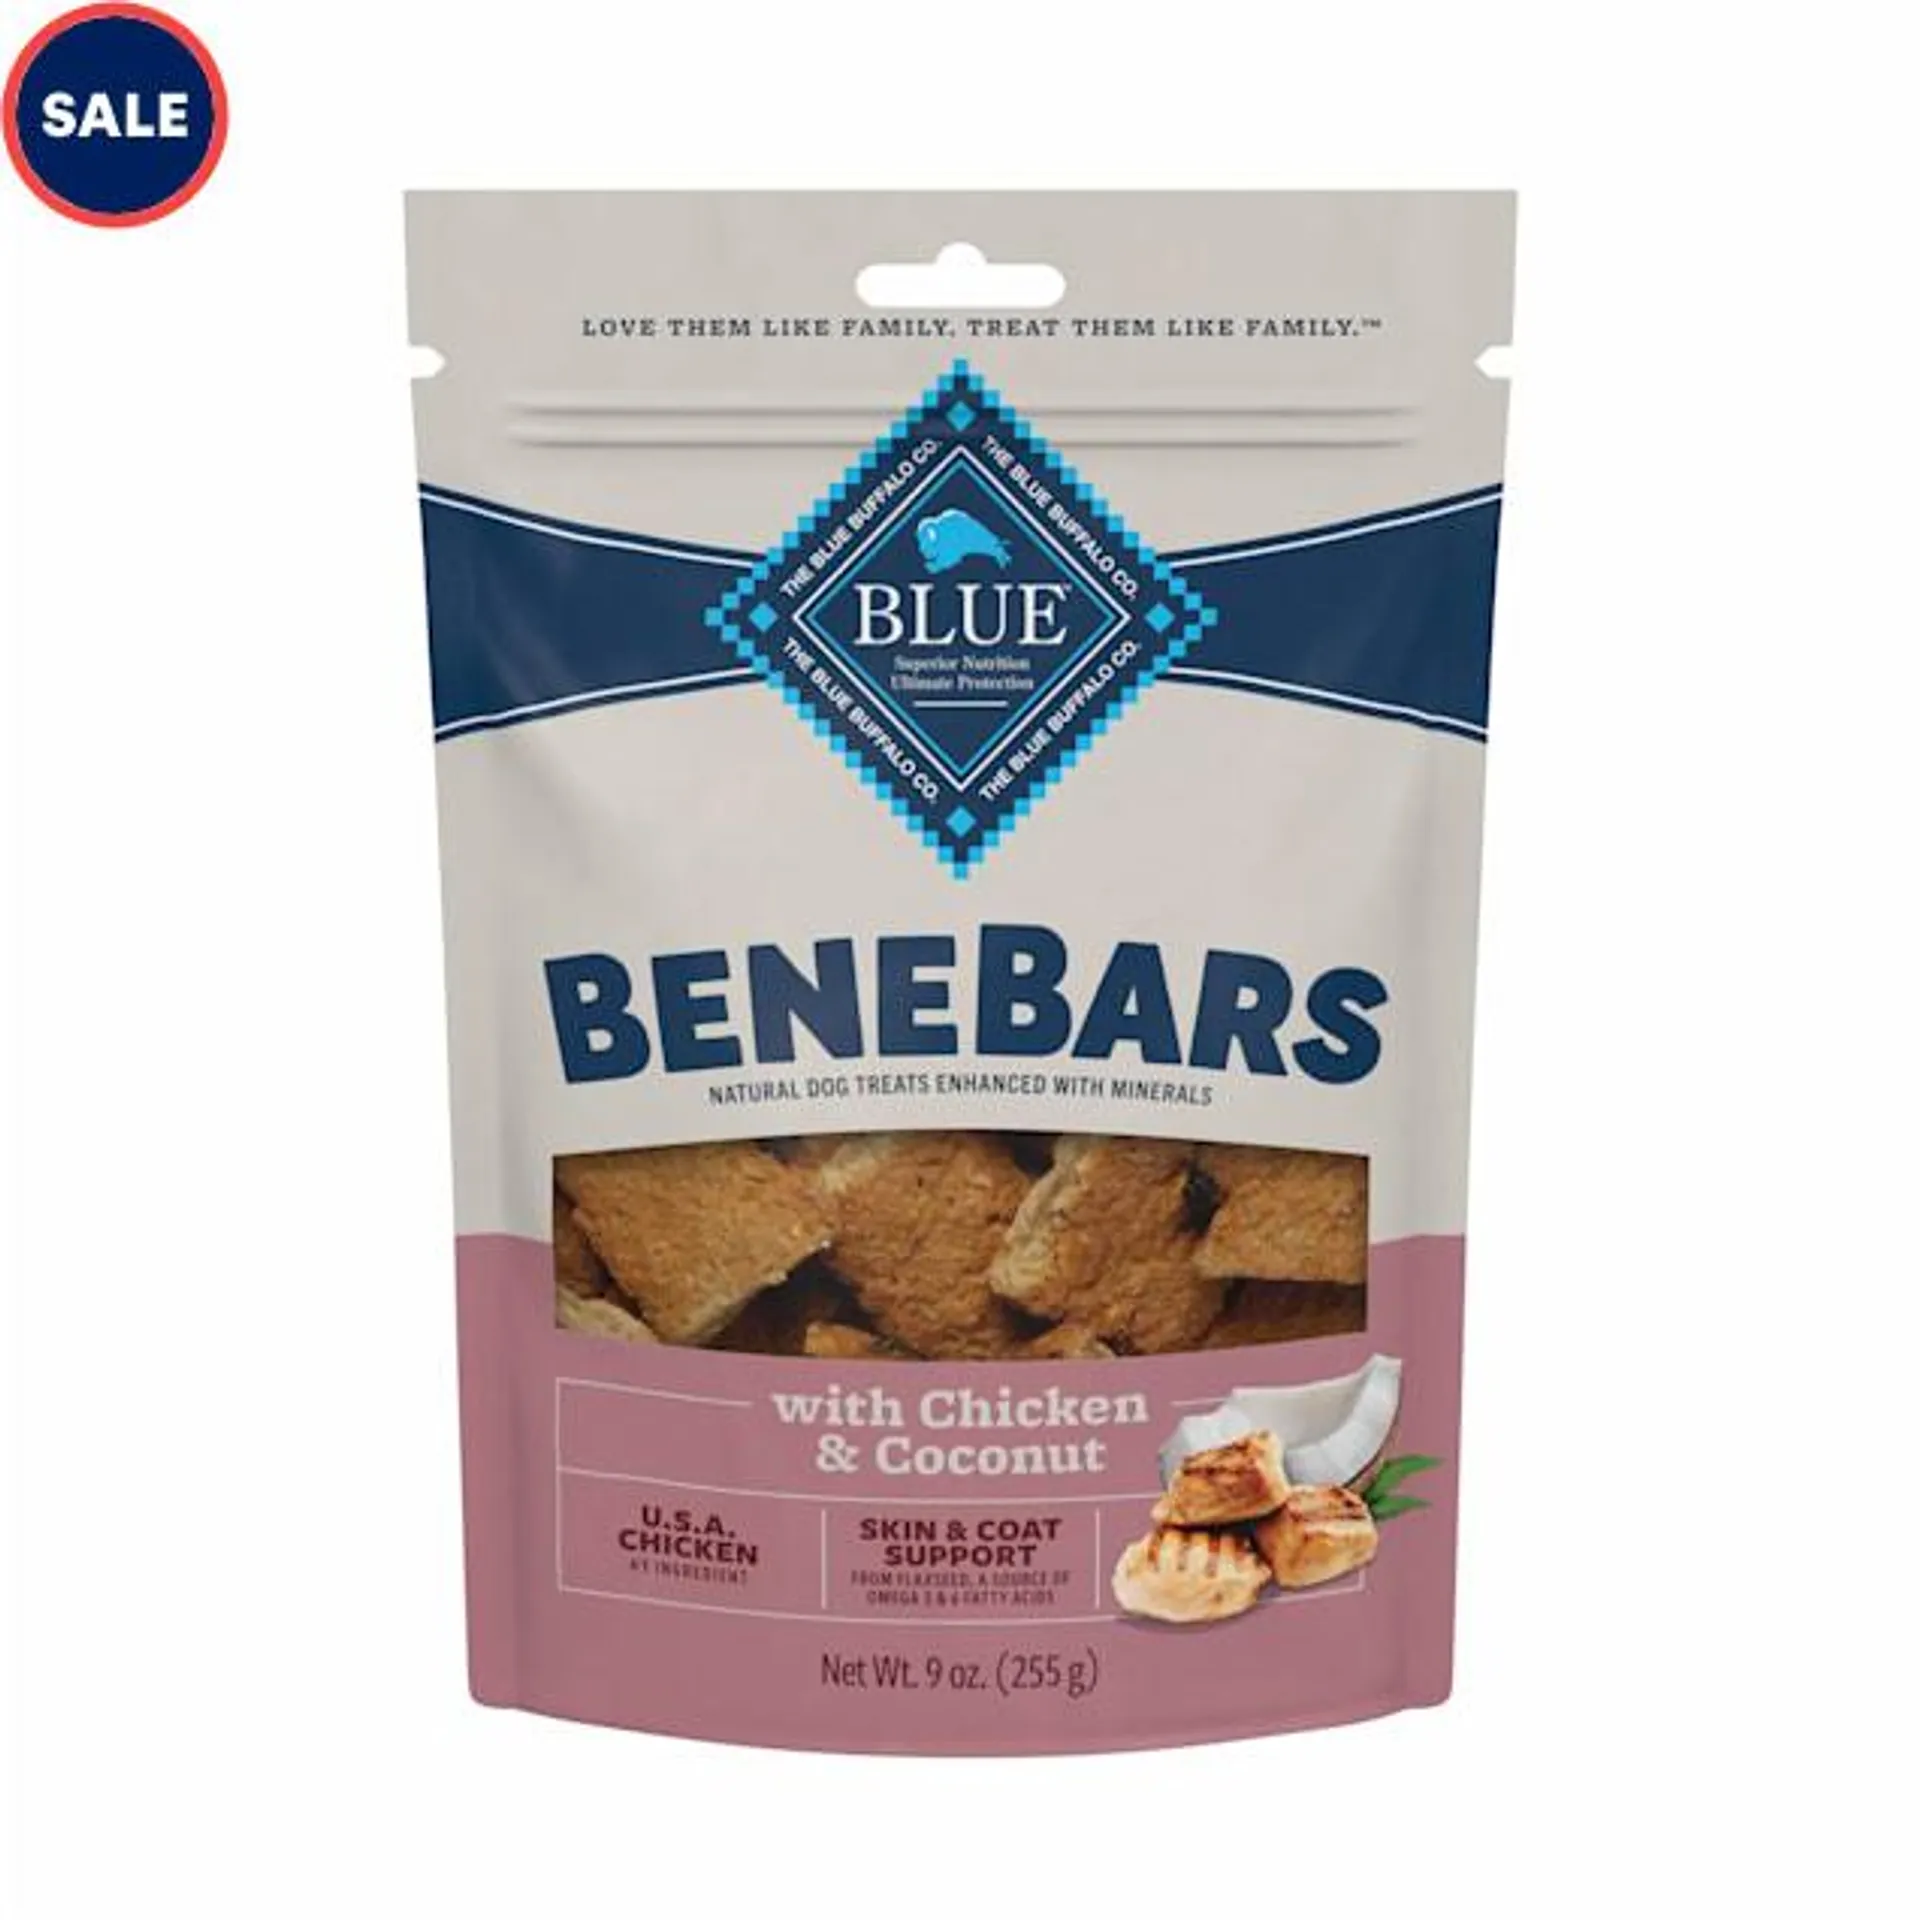 Blue Buffalo Benebars Skin and Coat Support, Chicken and Coconut Natural Dog Treats, 9 oz.